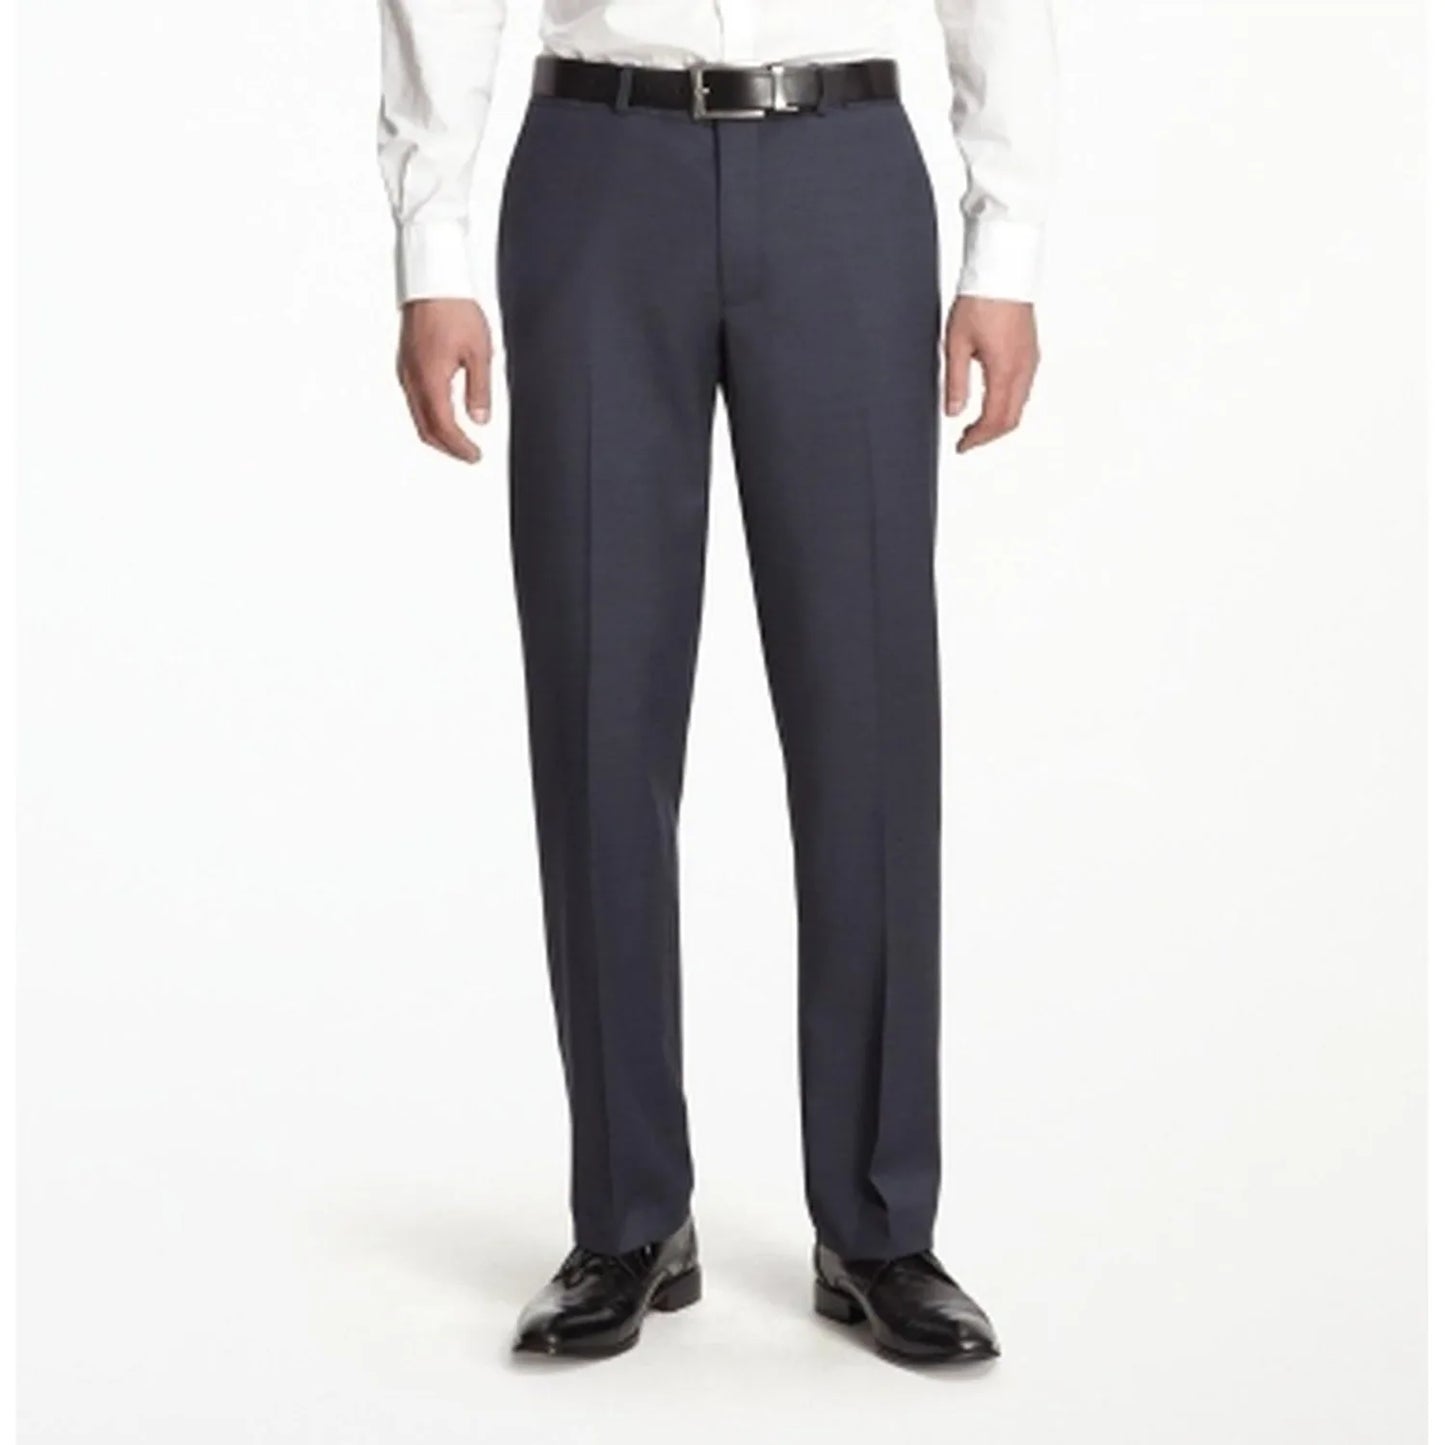 Ballin Flat Front Trousers - Saddle (2 Fits)